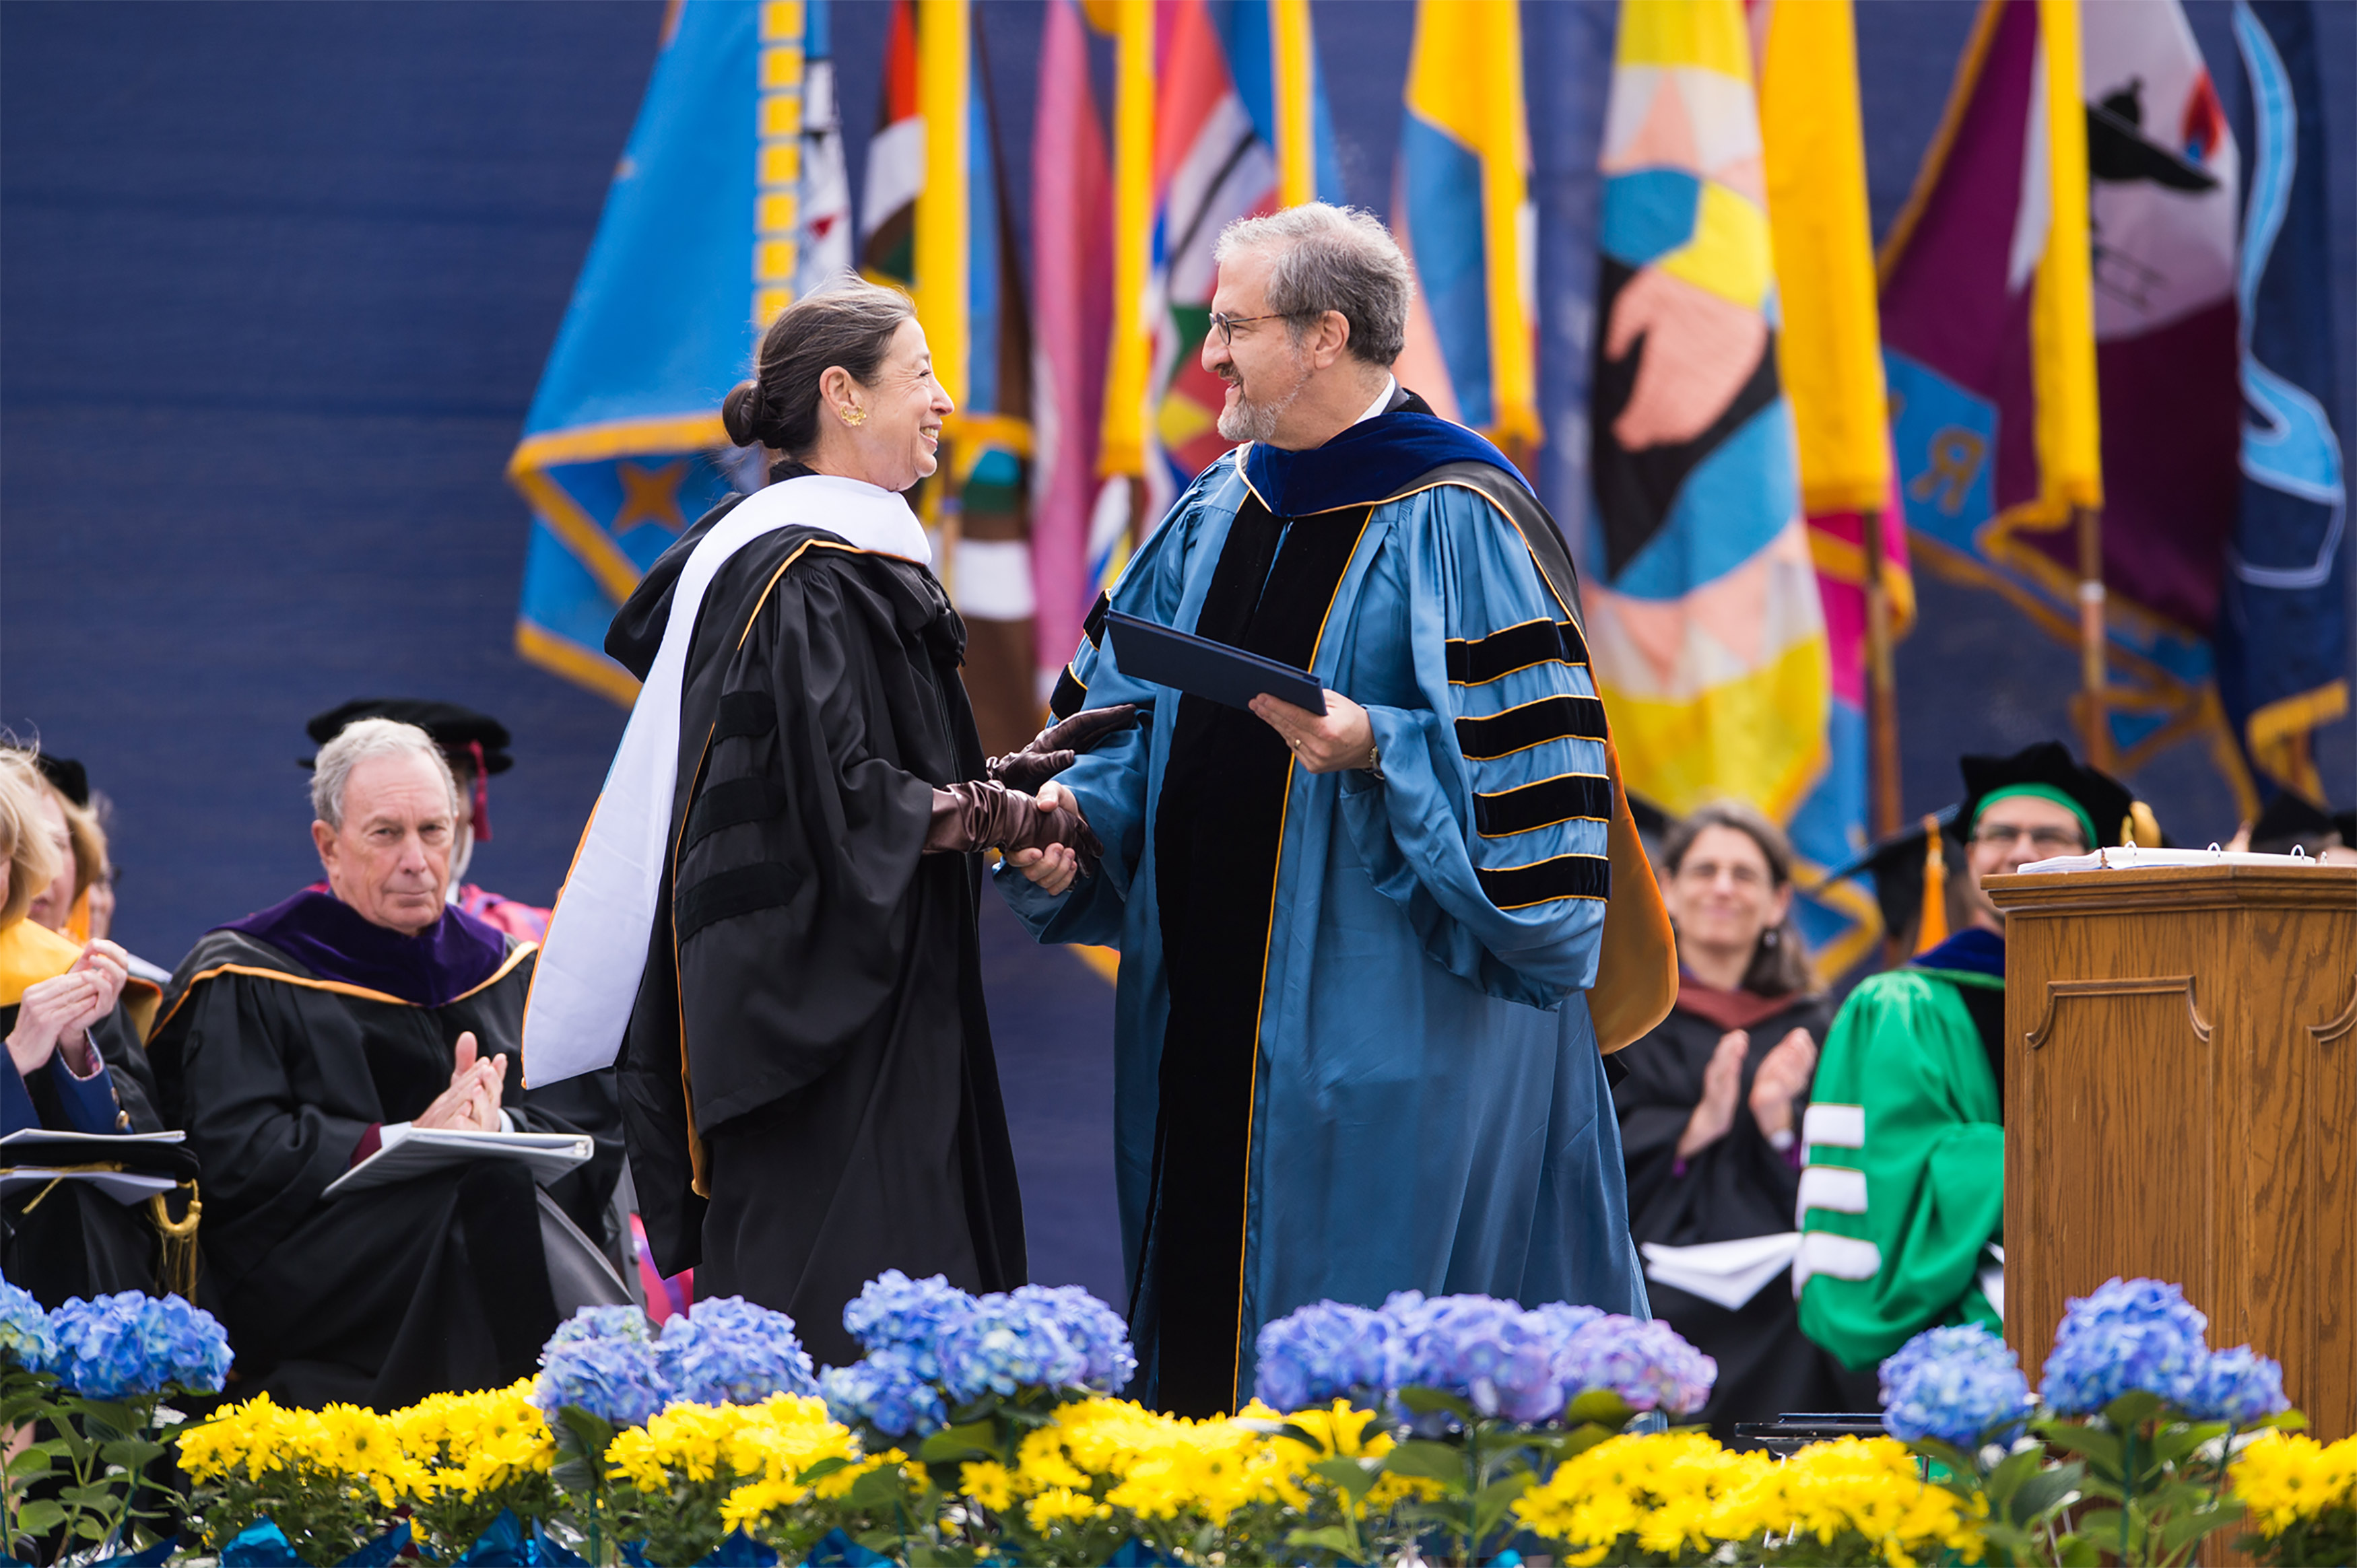 Commencement-Photograph---Relased-to-Michele-Oka-Doner-by-the-University-of-Michigan-Office-of-the-President-RGB-smaller-for-web-3500-x-2329-pixels